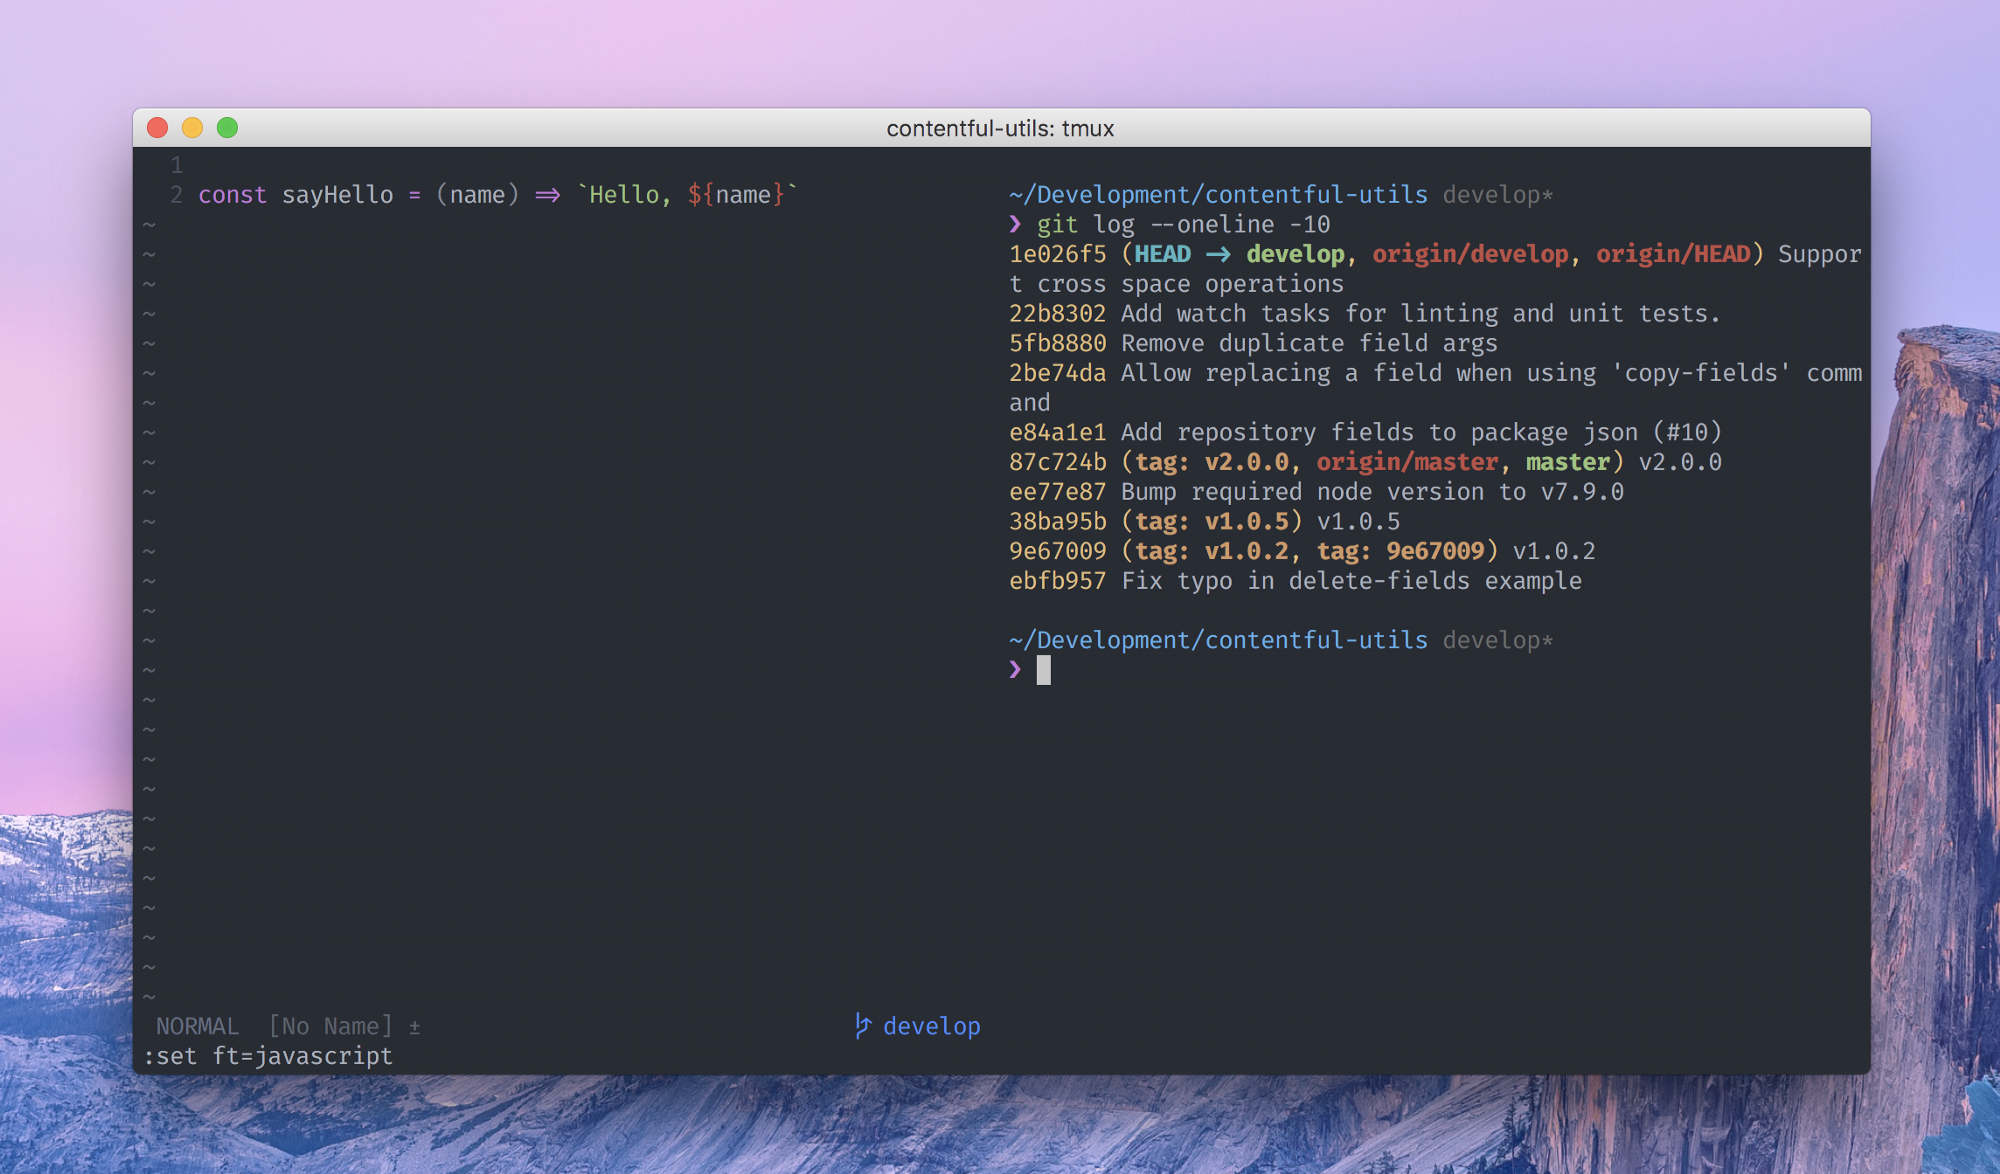 iterm color overwrite zsh